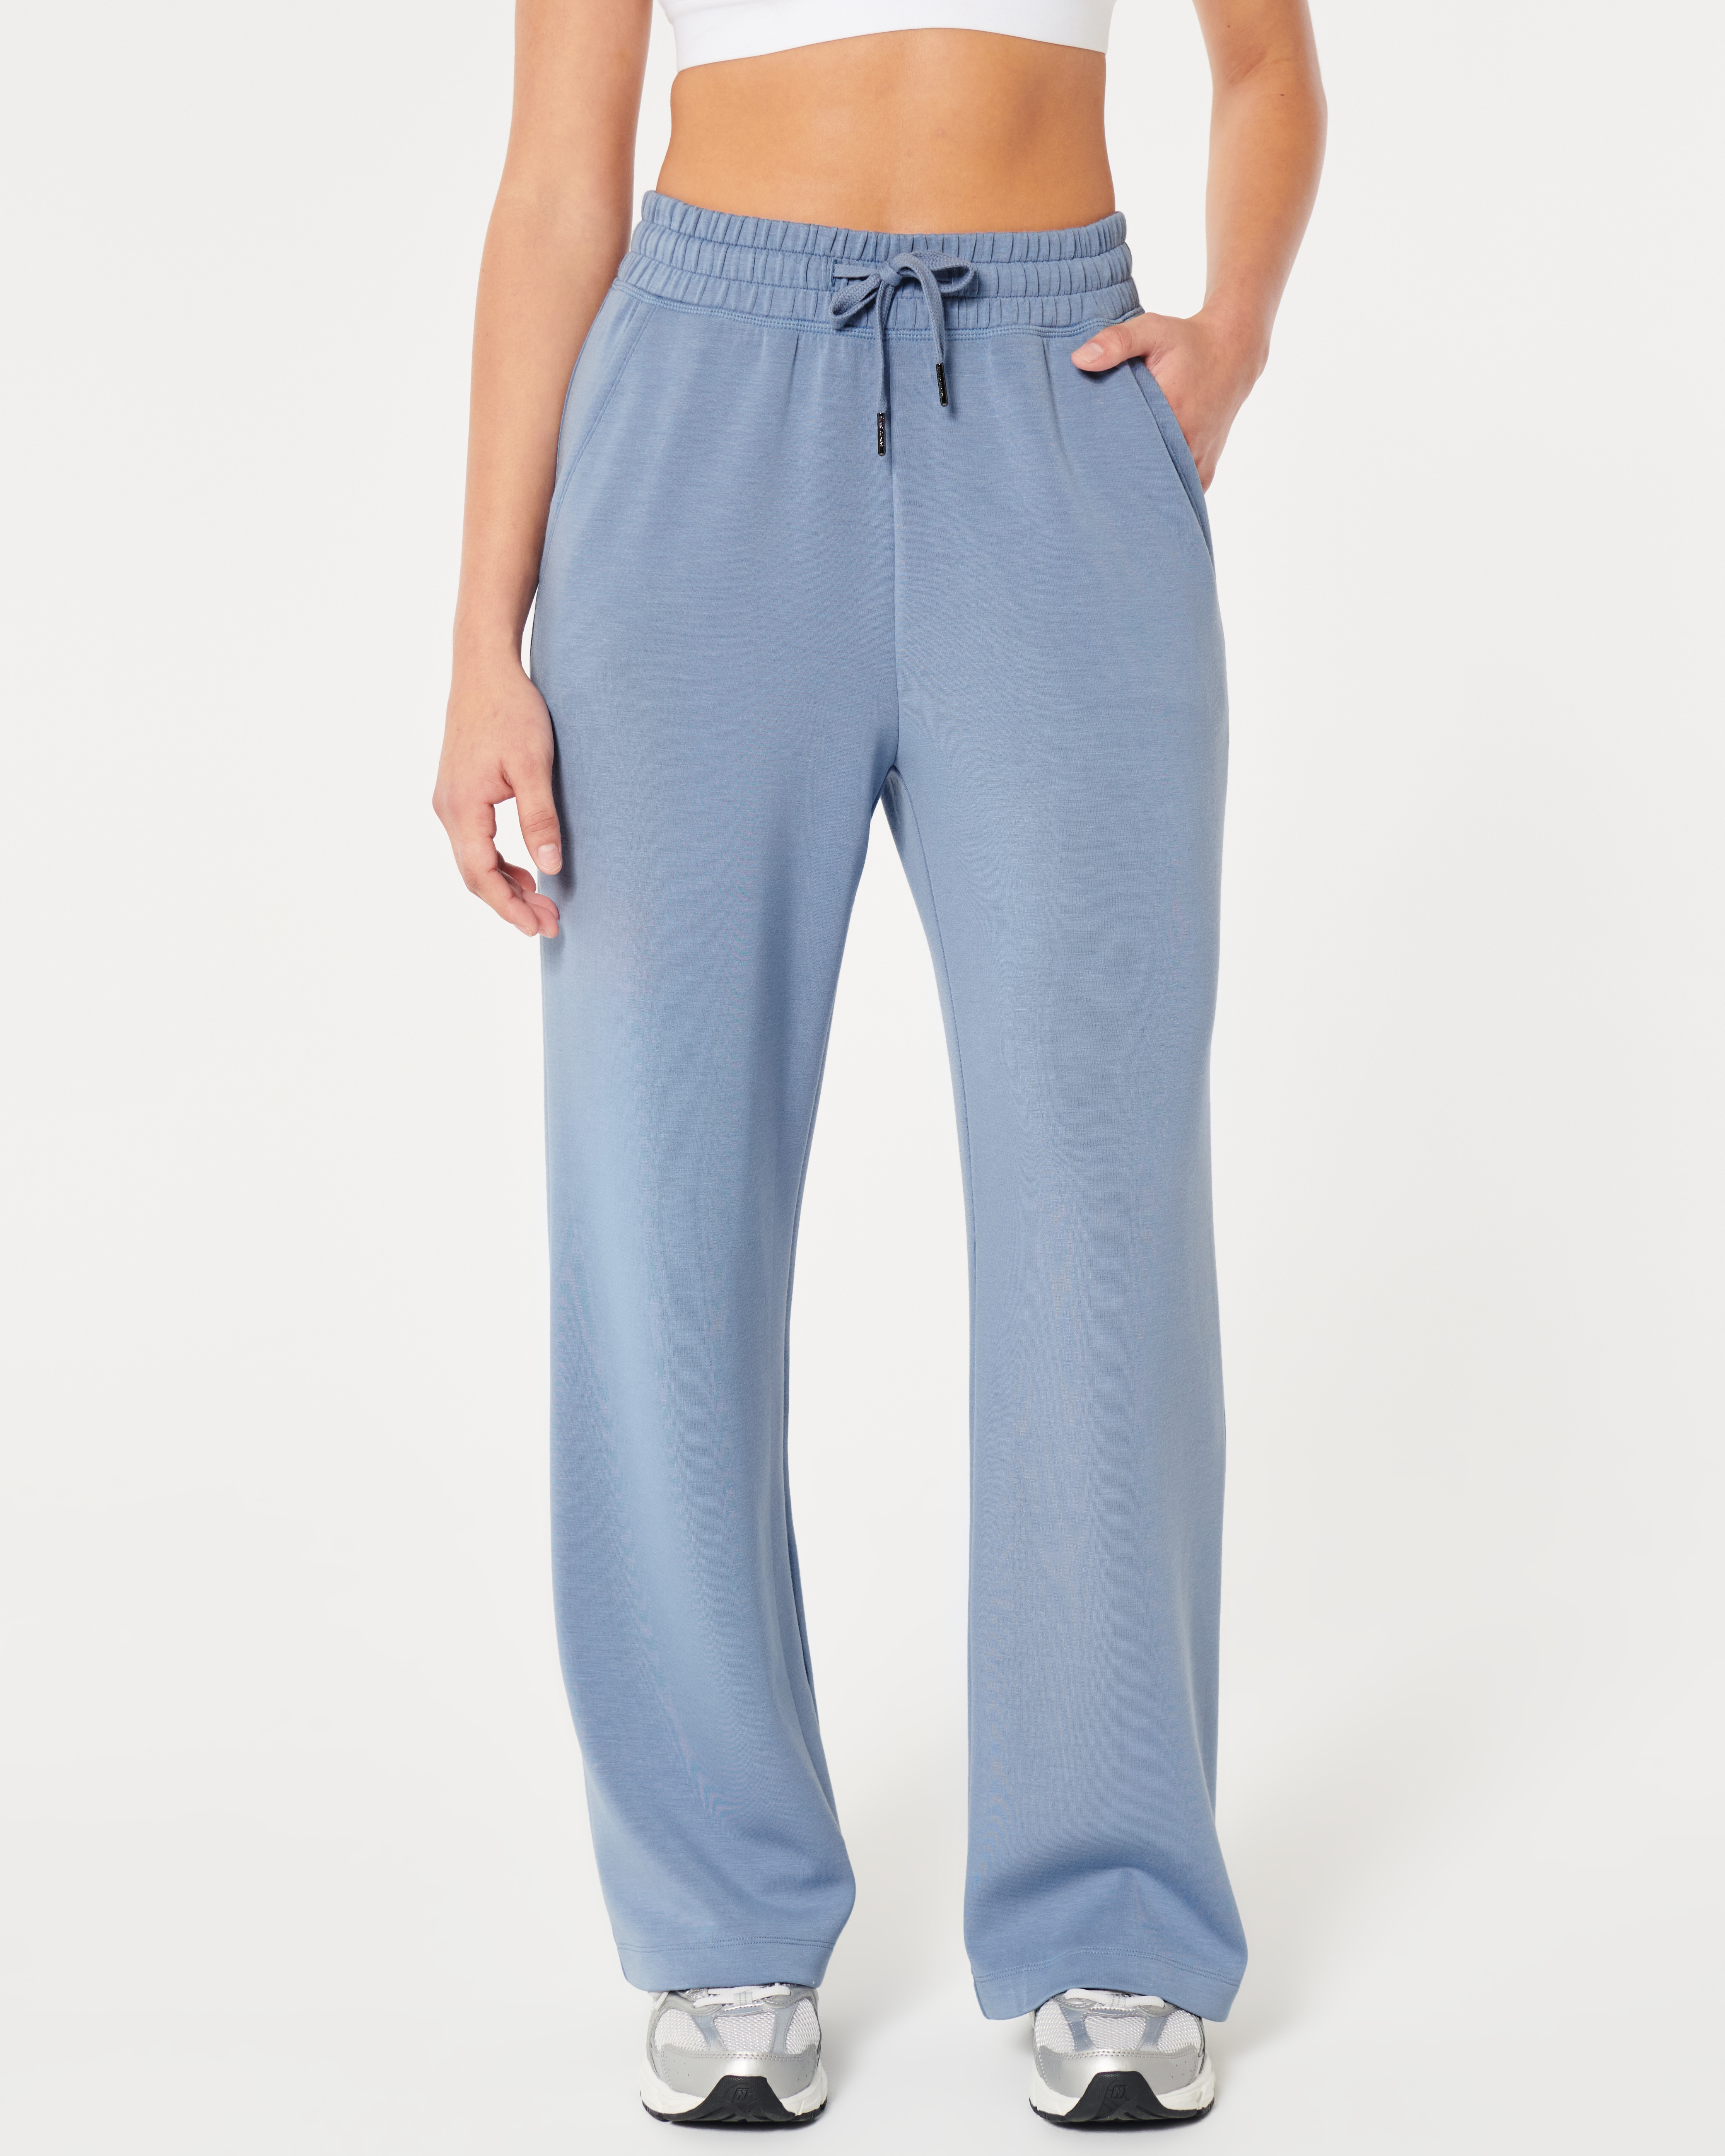 Gilly Hicks Active Cooldown Wide-Leg Pants